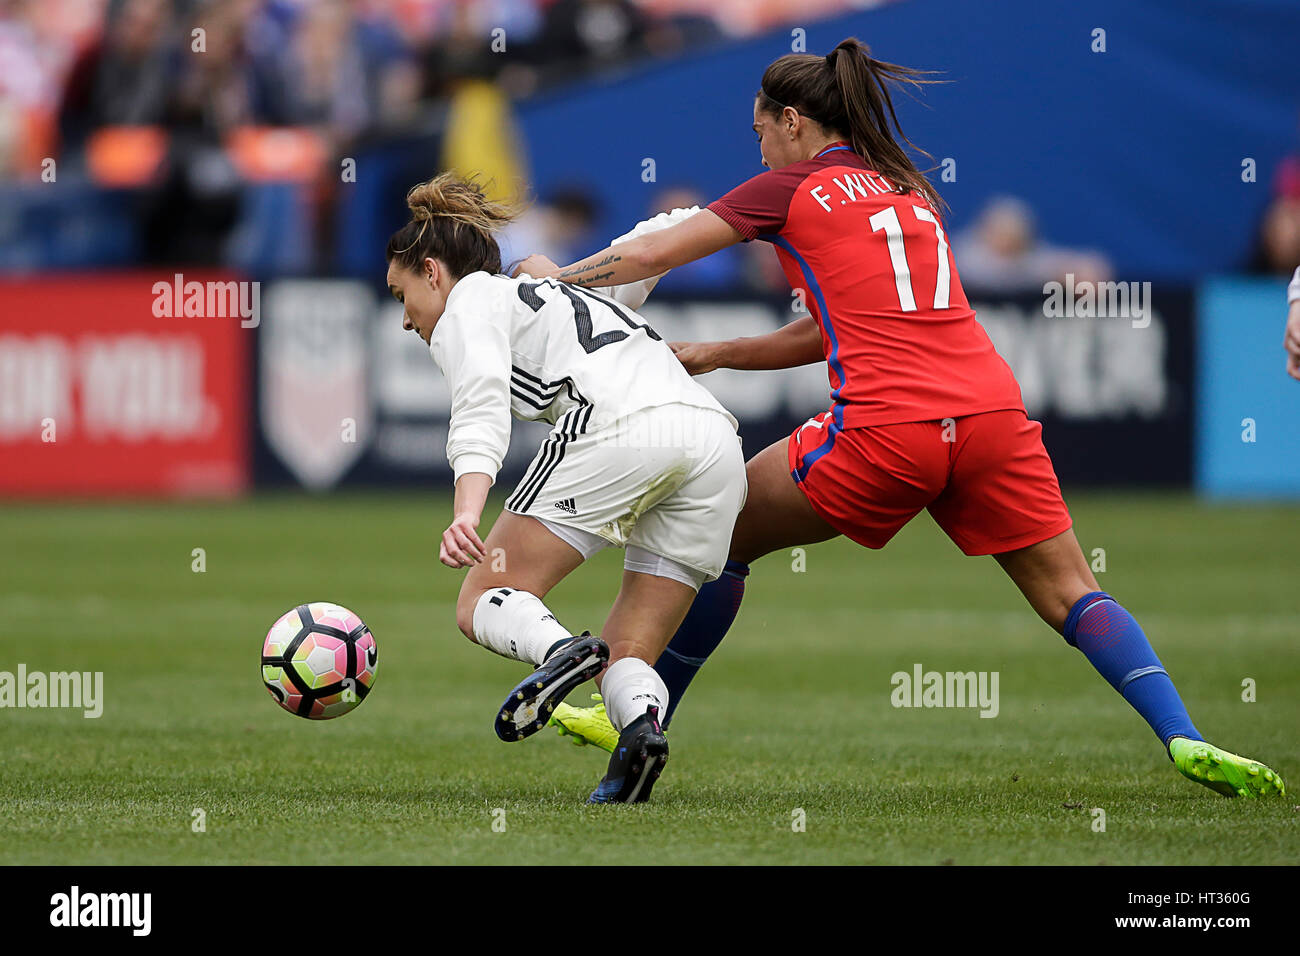 Washington DC, USA. 7th Mar, 2017. English Women's National Team Midfielder #17 Fara Williams knocks down German Women's National Team Goalkeeper #21 Lisa WeiB trying to get the ball during a soccer match as part of the SheBelieve Cup 2017 between Germany and England at RFK Stadium in Washington DC. Germany defeats England, 1-0. Justin Cooper/CSM/Alamy Live News Stock Photo